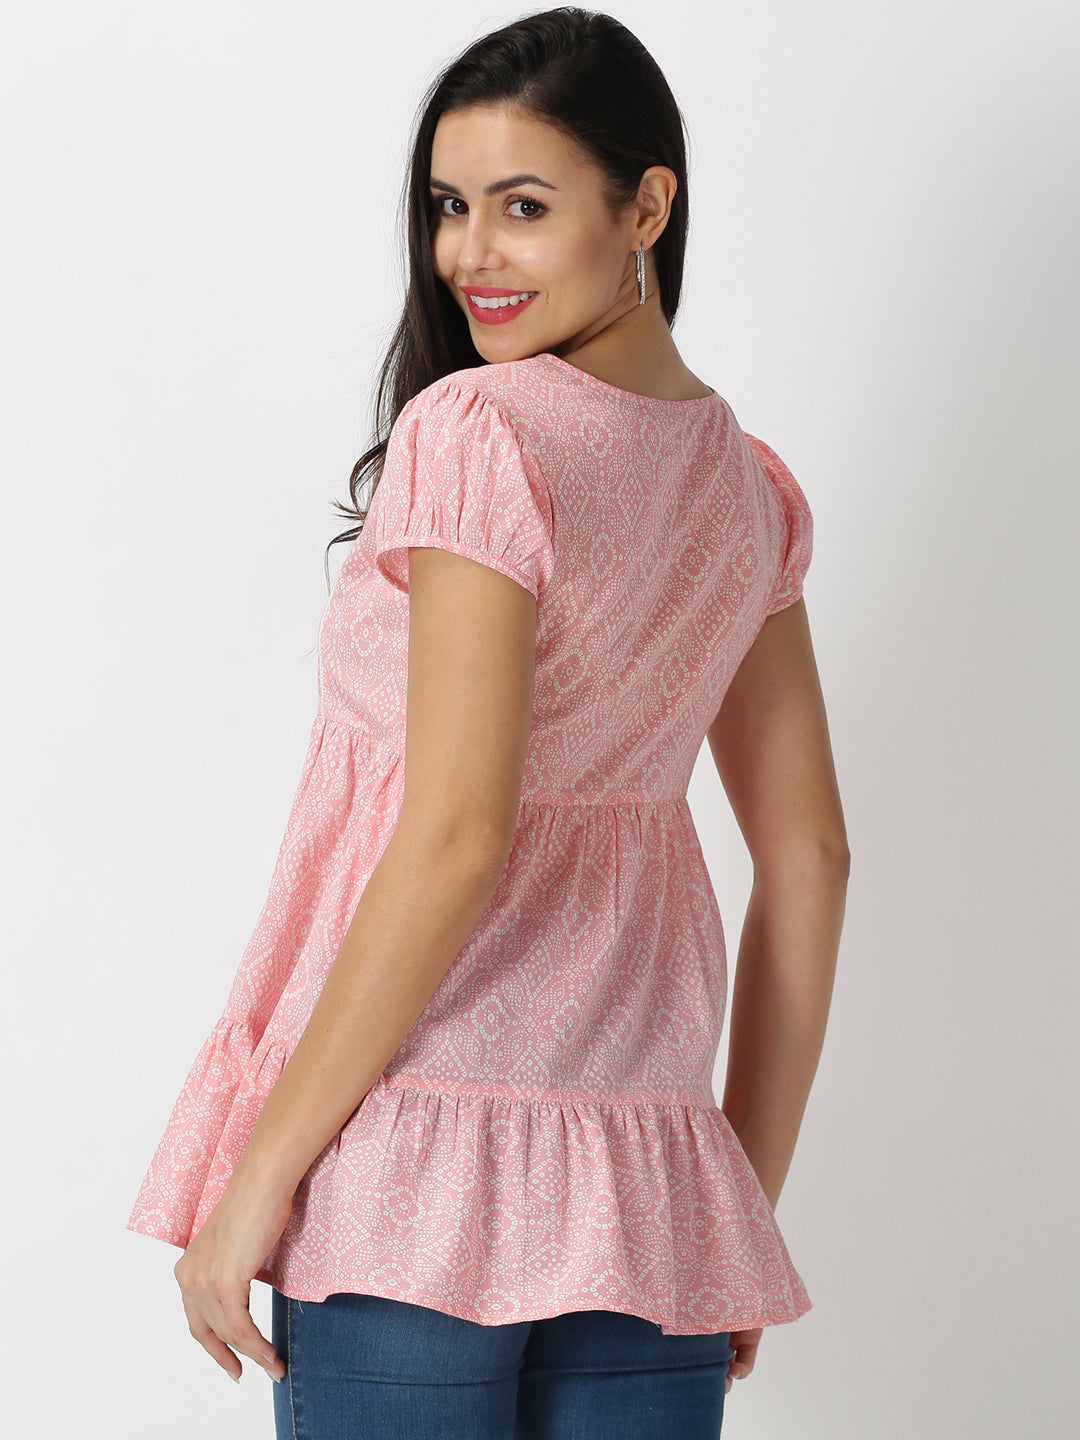 Pink Bandhani Printed Tiered Top with Lace Inserts